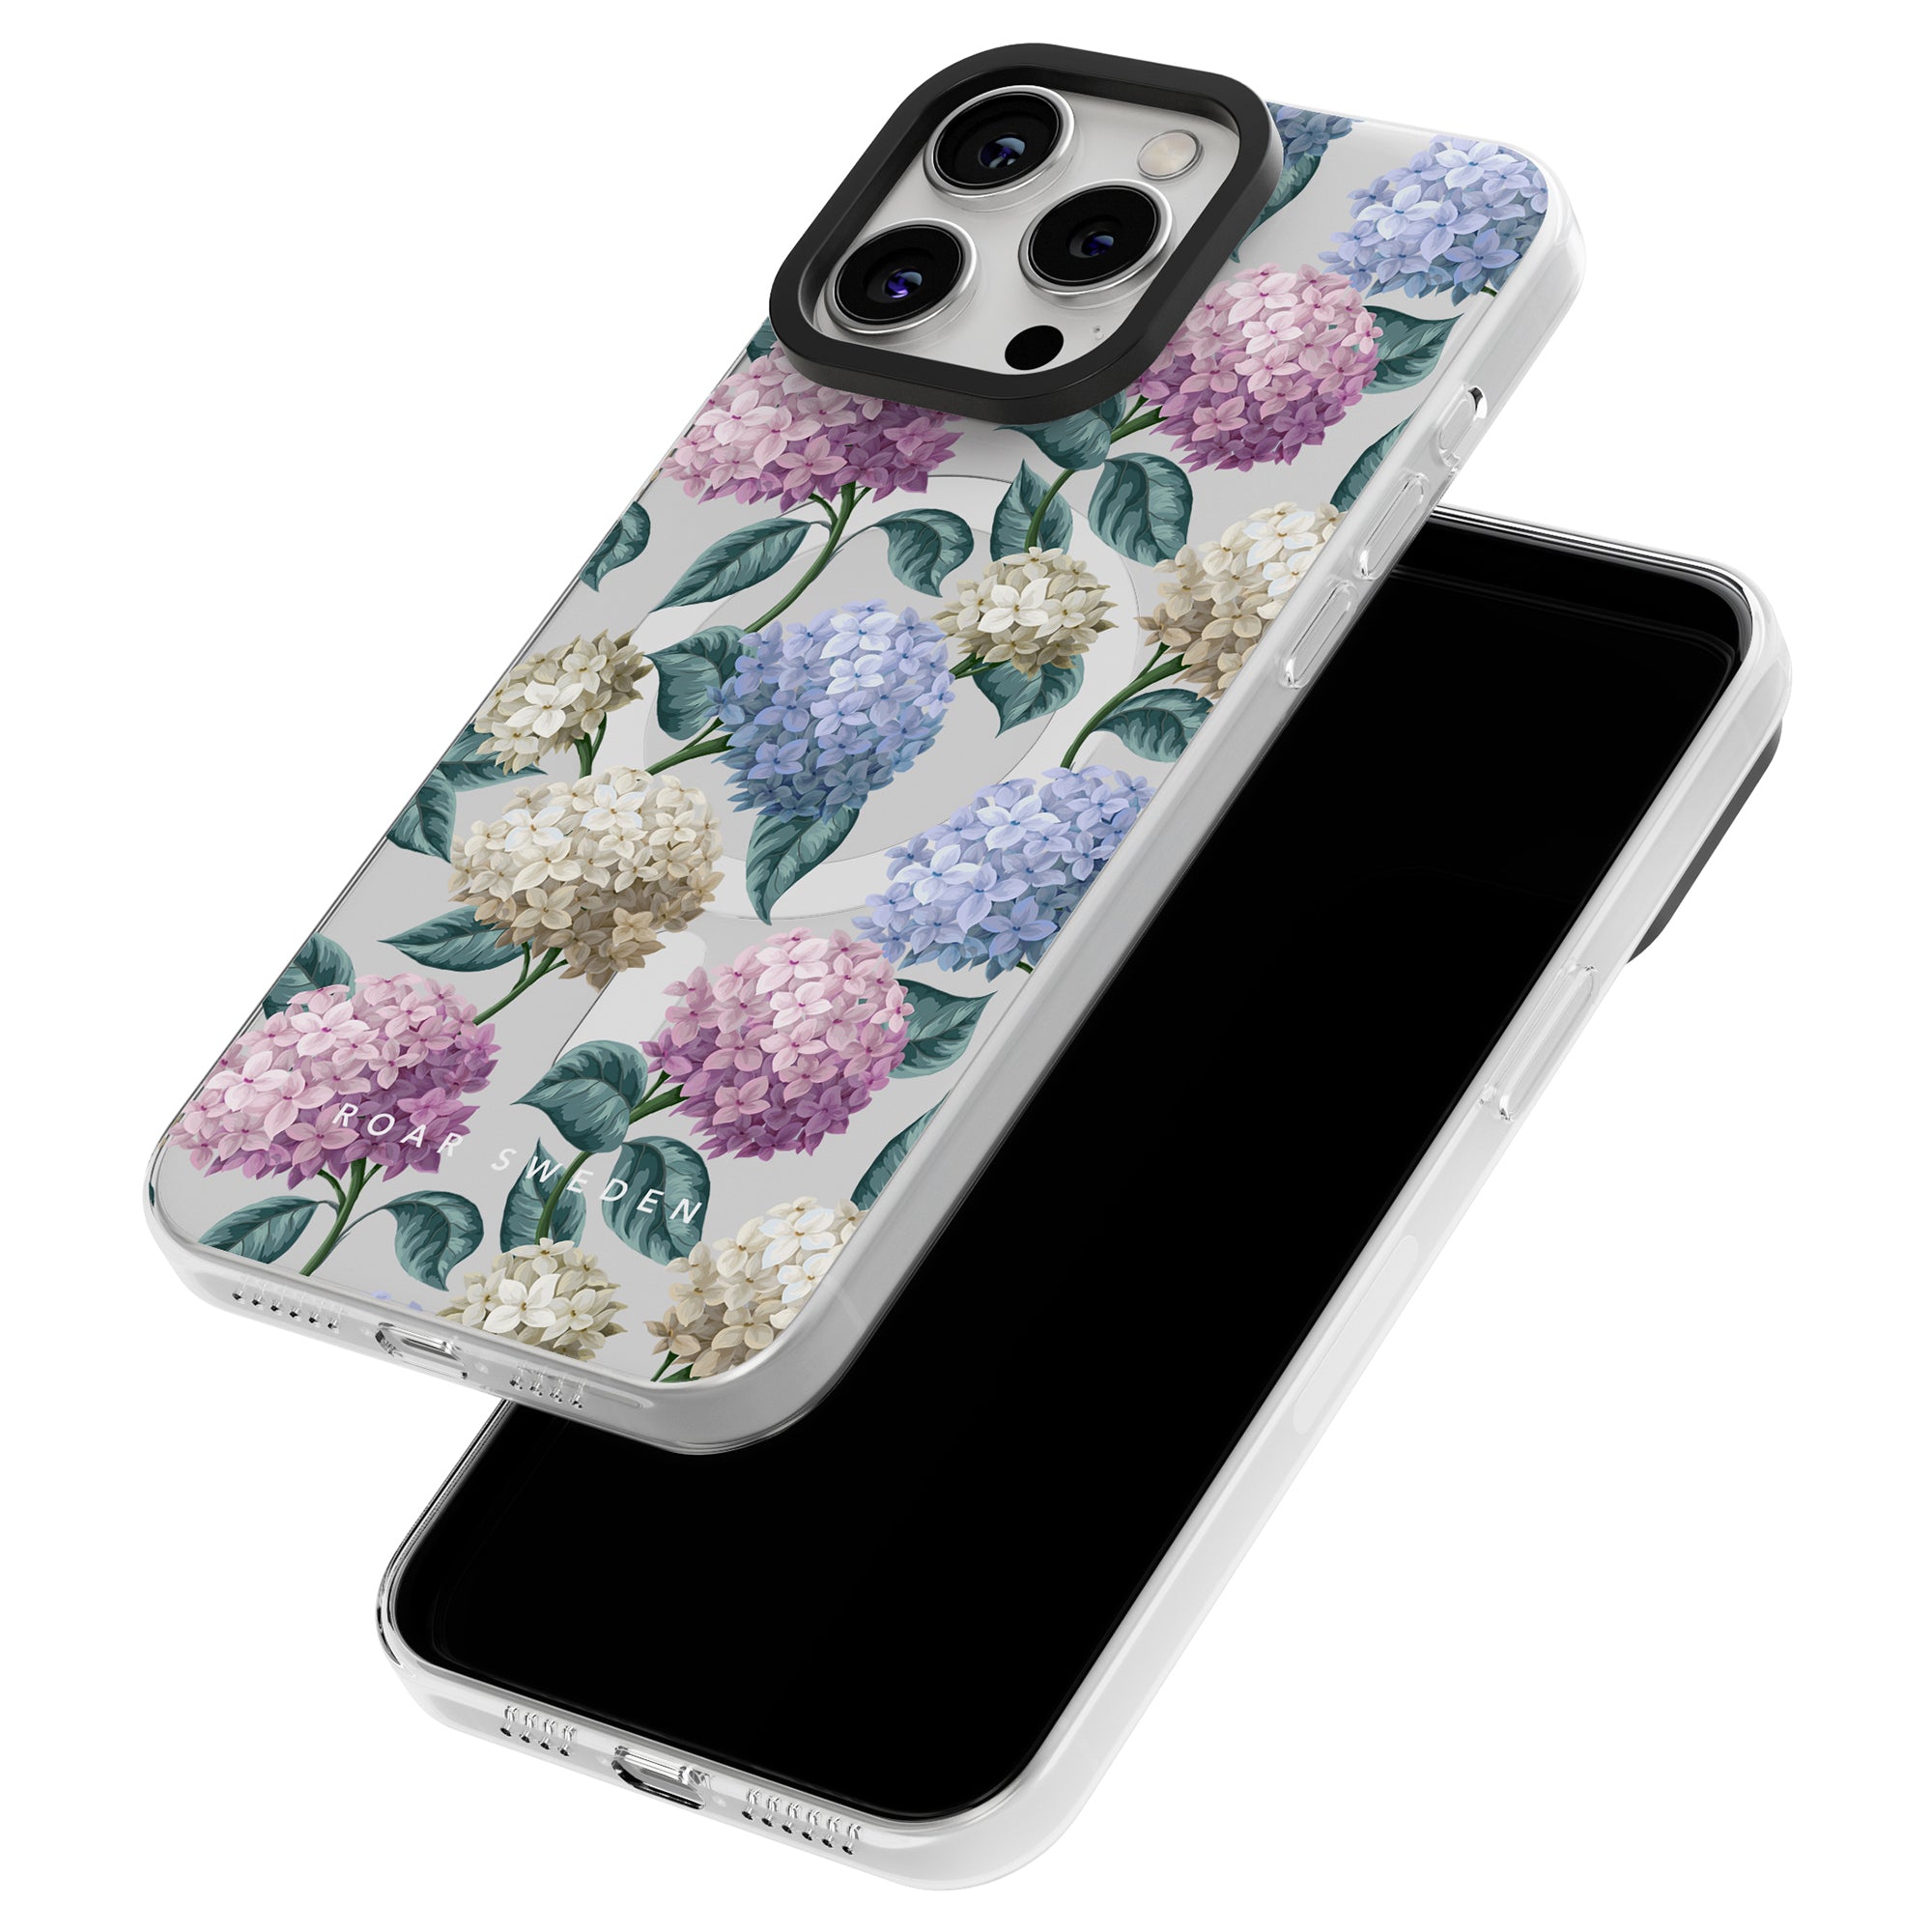 Two smartphone cases with hydrangea flower patterns are shown. One case is on a phone, displaying the back design, and the other is laid down, displaying the front. These **Hydrangea - MagSafe** cases are part of our elegant Floral Collection and seamlessly integrate with all your MagSafe accessories.